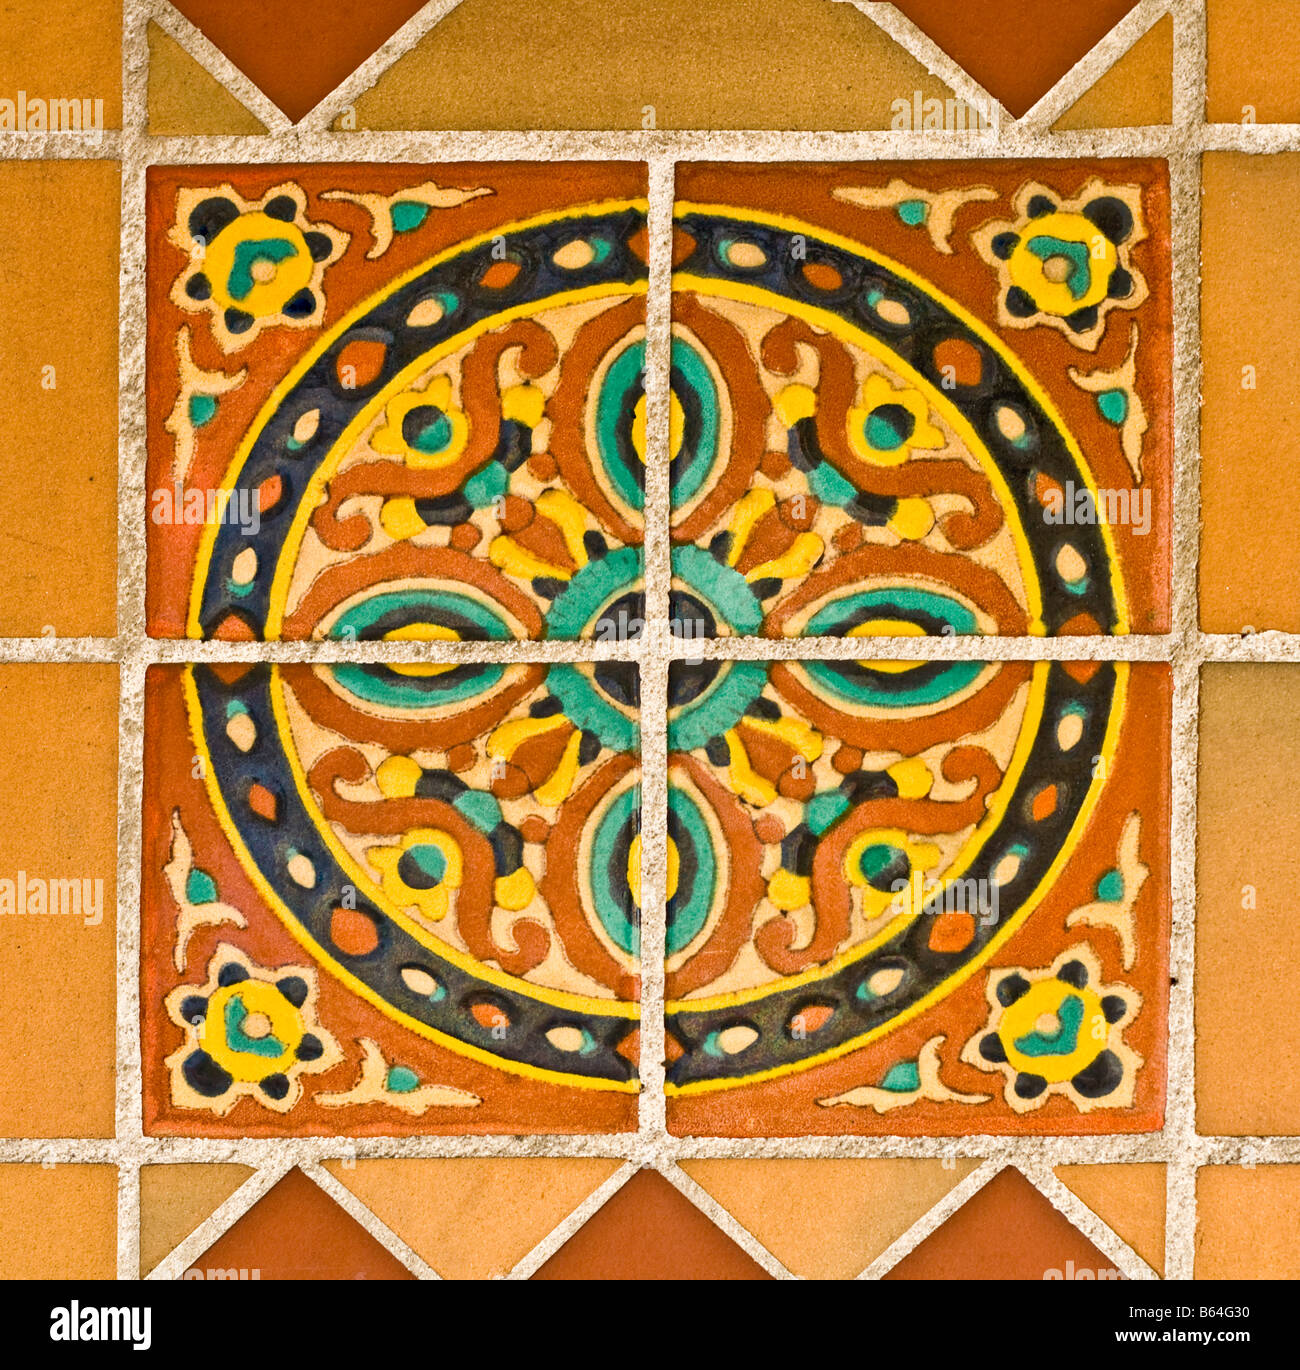 Colorful Spanish Painted Tiles with Intricate Design Stock Photo